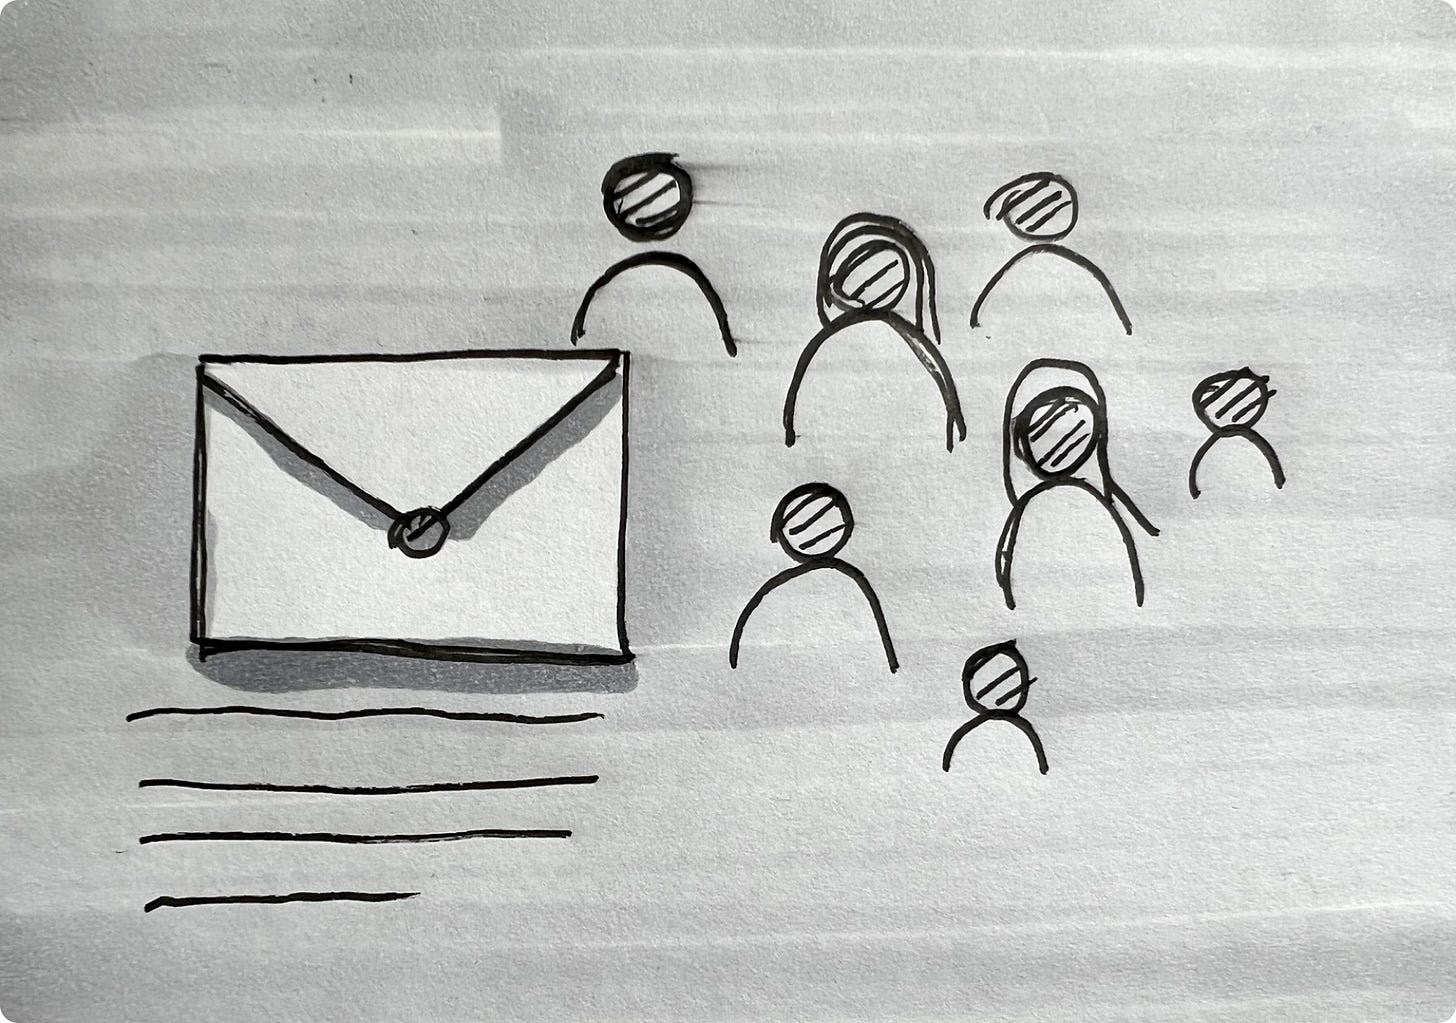 Drawing of a mail envelope with people next to it